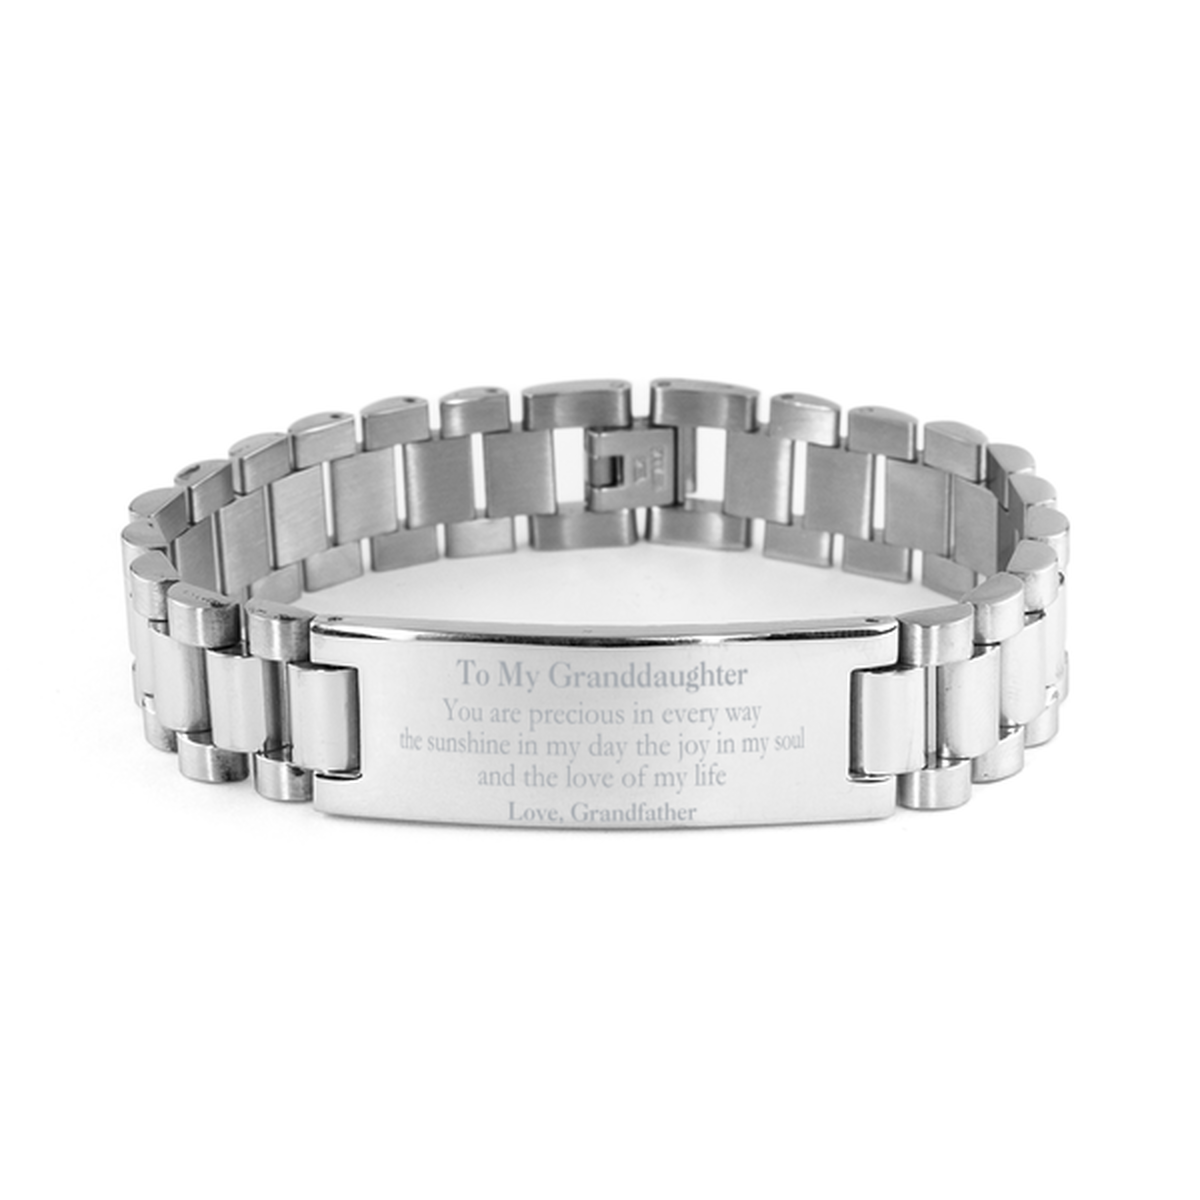 Graduation Gifts for Granddaughter Ladder Stainless Steel Bracelet Present from Grandfather, Christmas Granddaughter Birthday Gifts Granddaughter You are precious in every way the sunshine in my day. Love, Grandfather